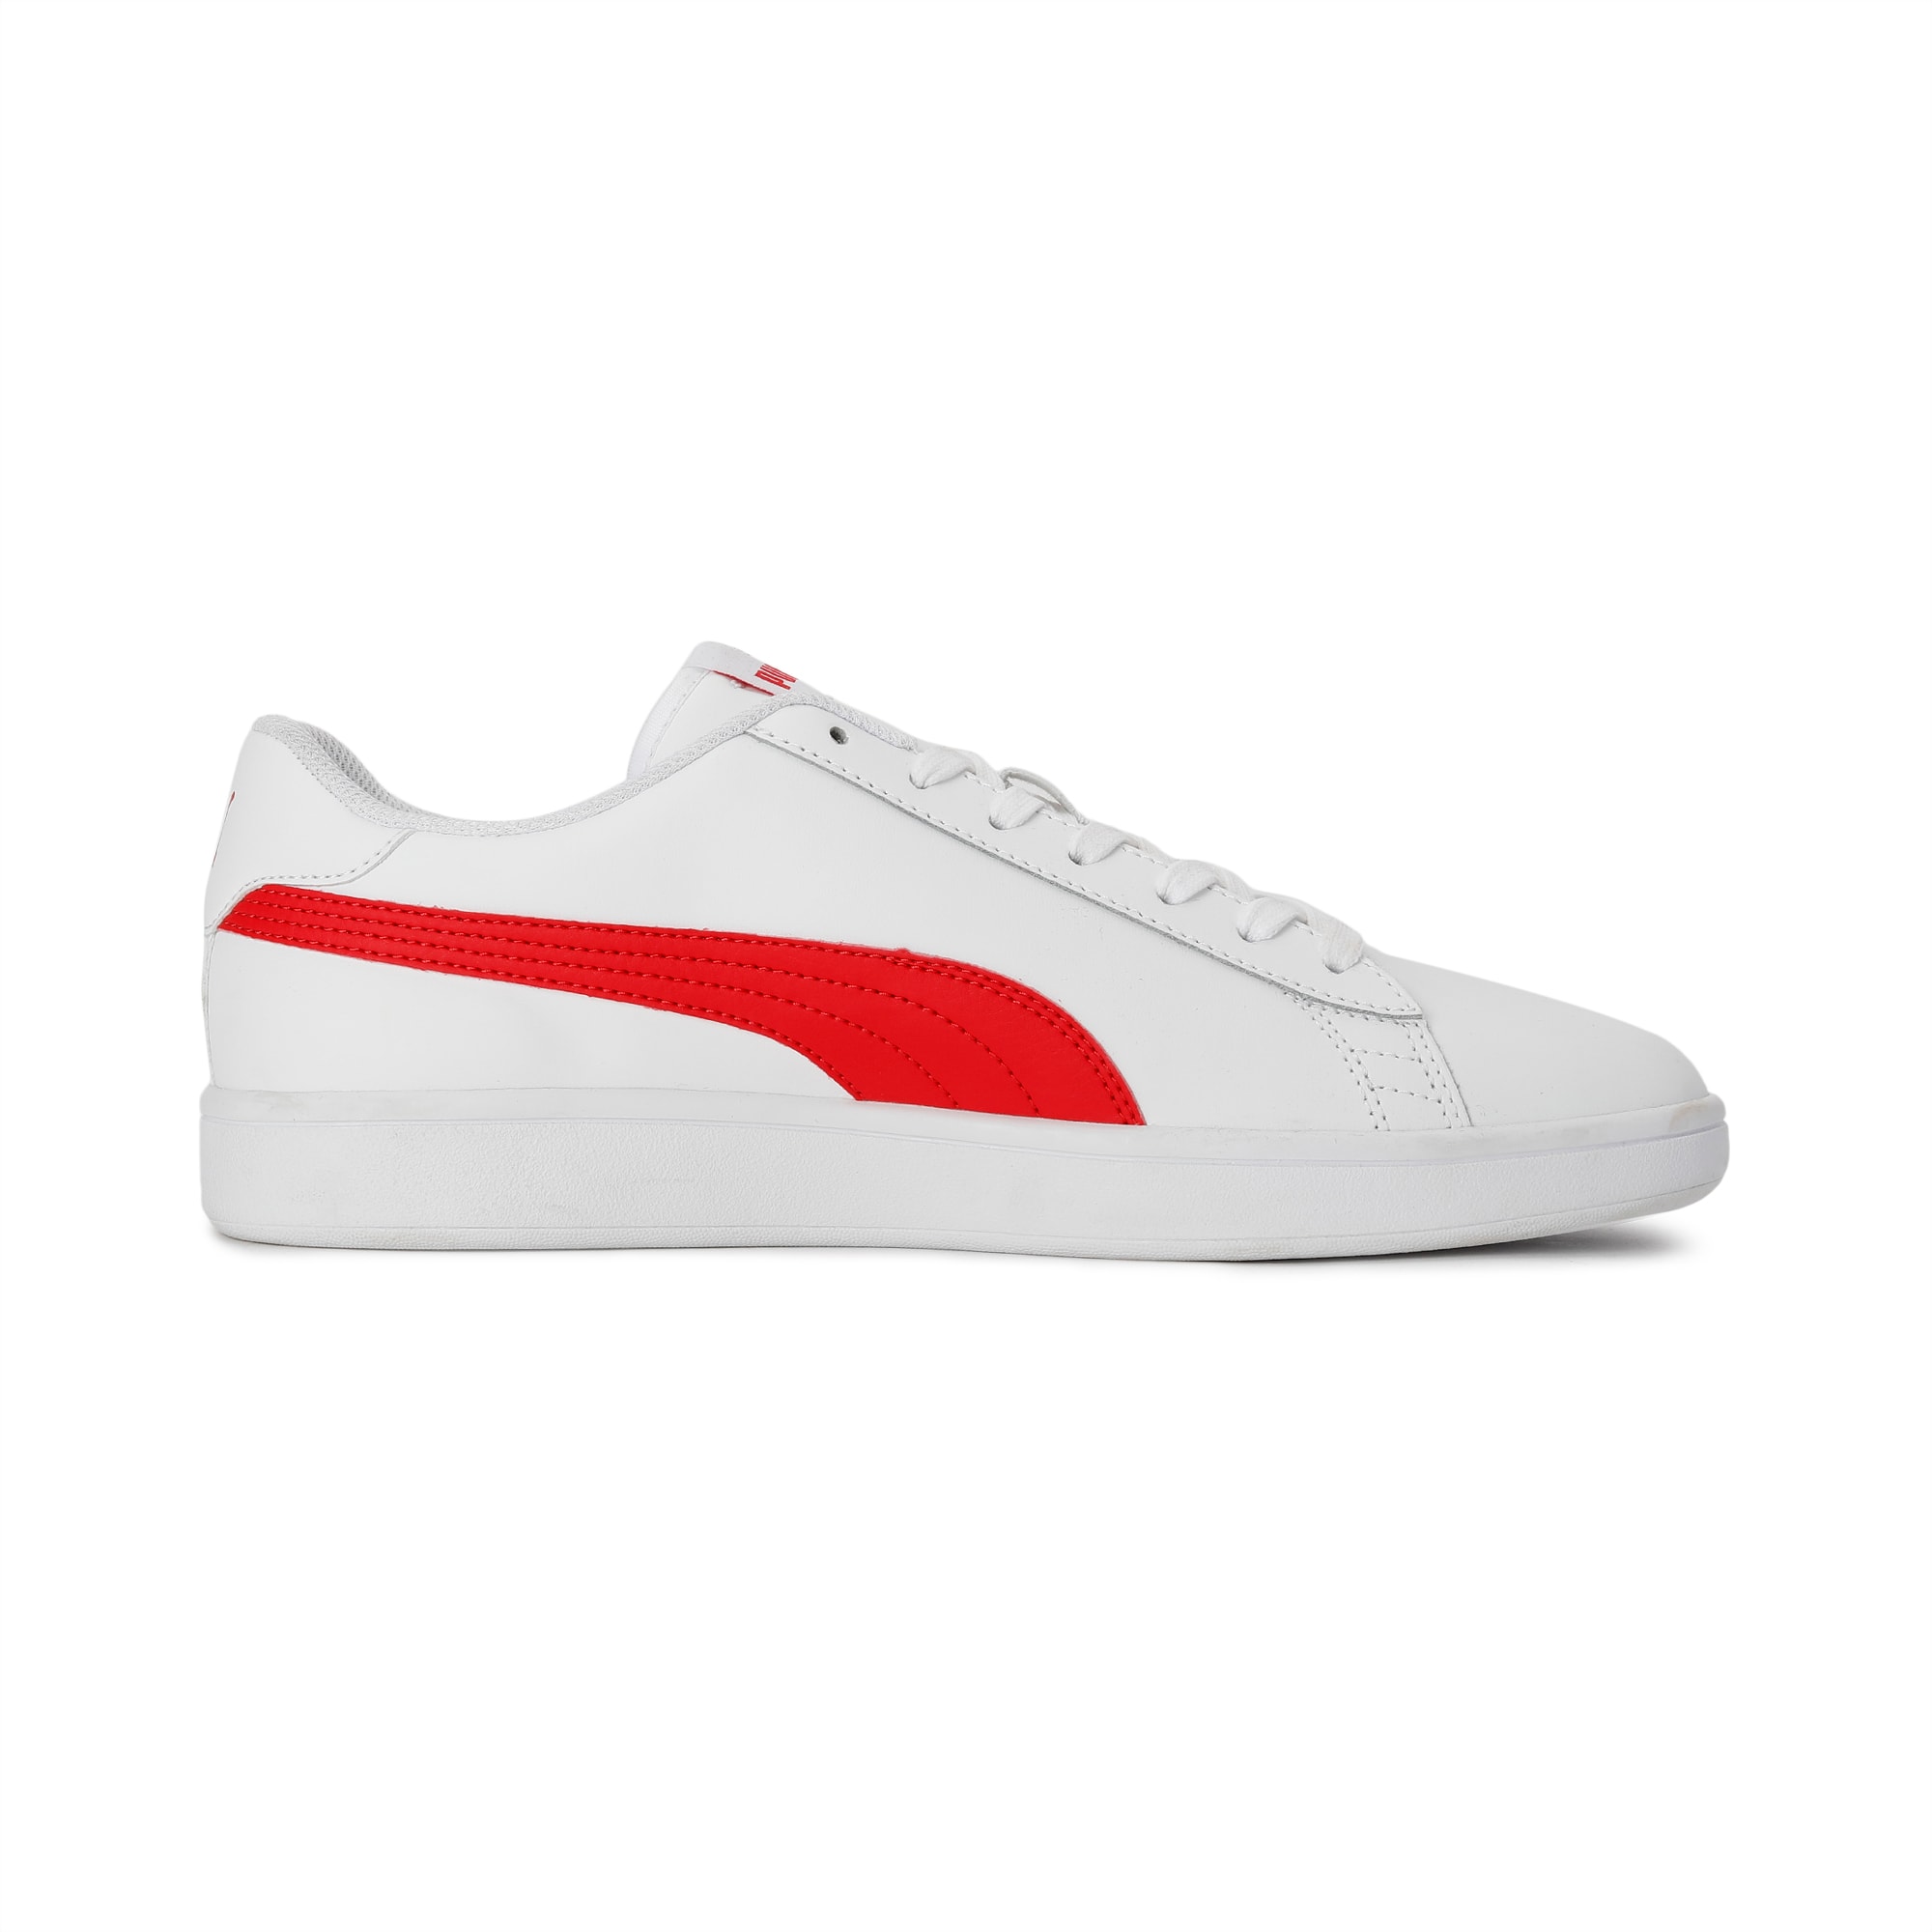 PUMA Smash v2 Leather Men's Athletic Shoes White/Red/Gold 365215 17 SO8b